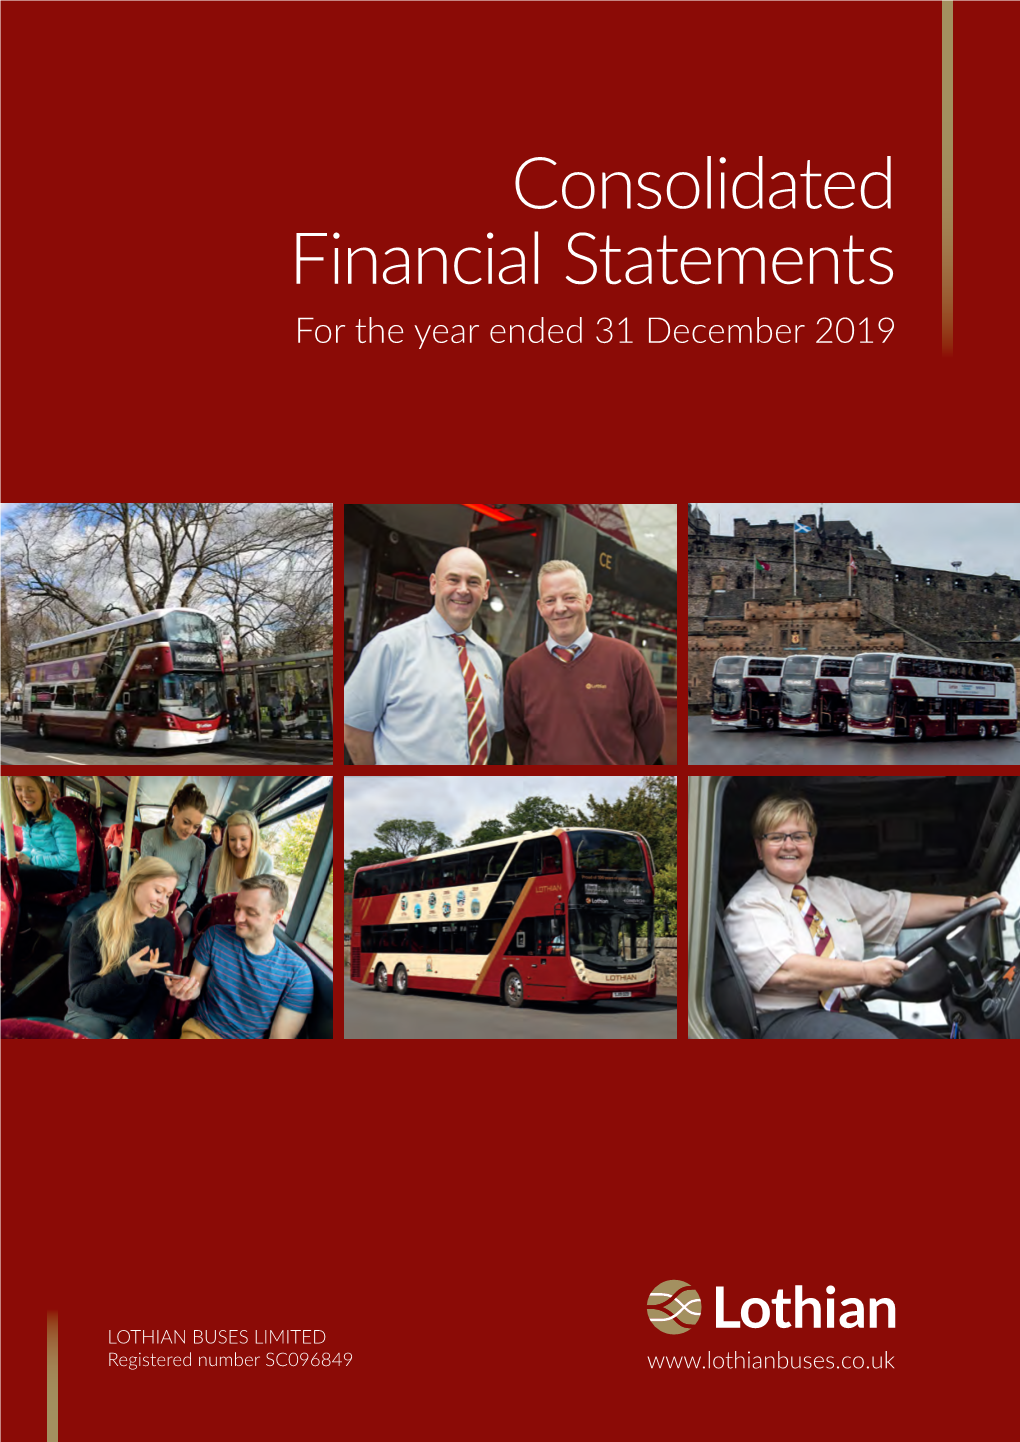 Consolidated Financial Statements for the Year Ended 31 December 2019